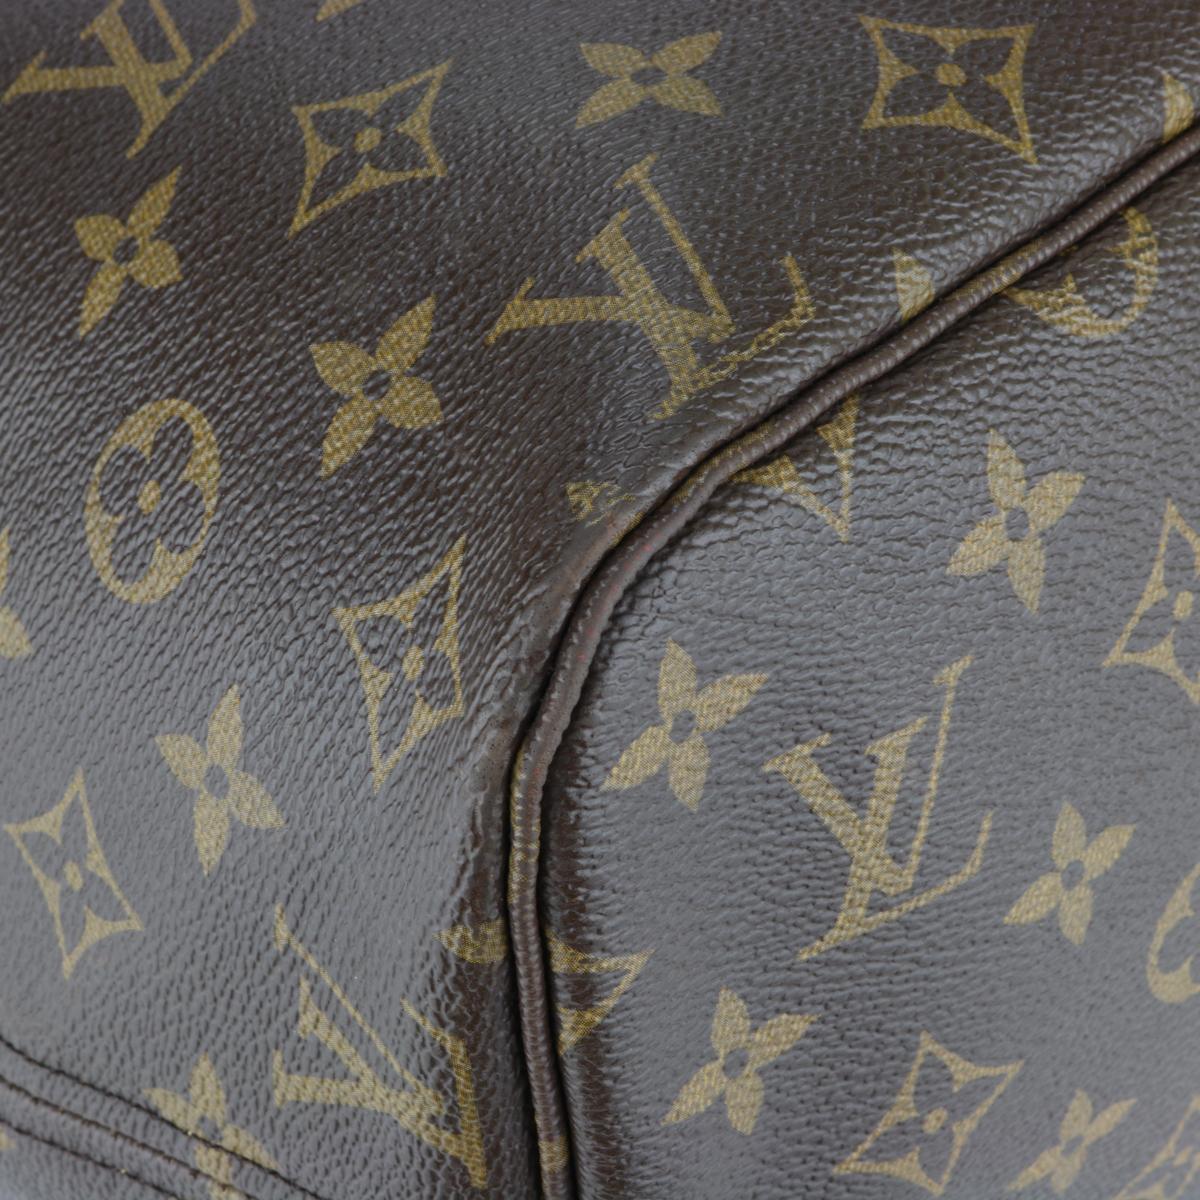 Louis Vuitton Neverfull MM Bag in Monogram with Beige Interior 2017 For Sale 2